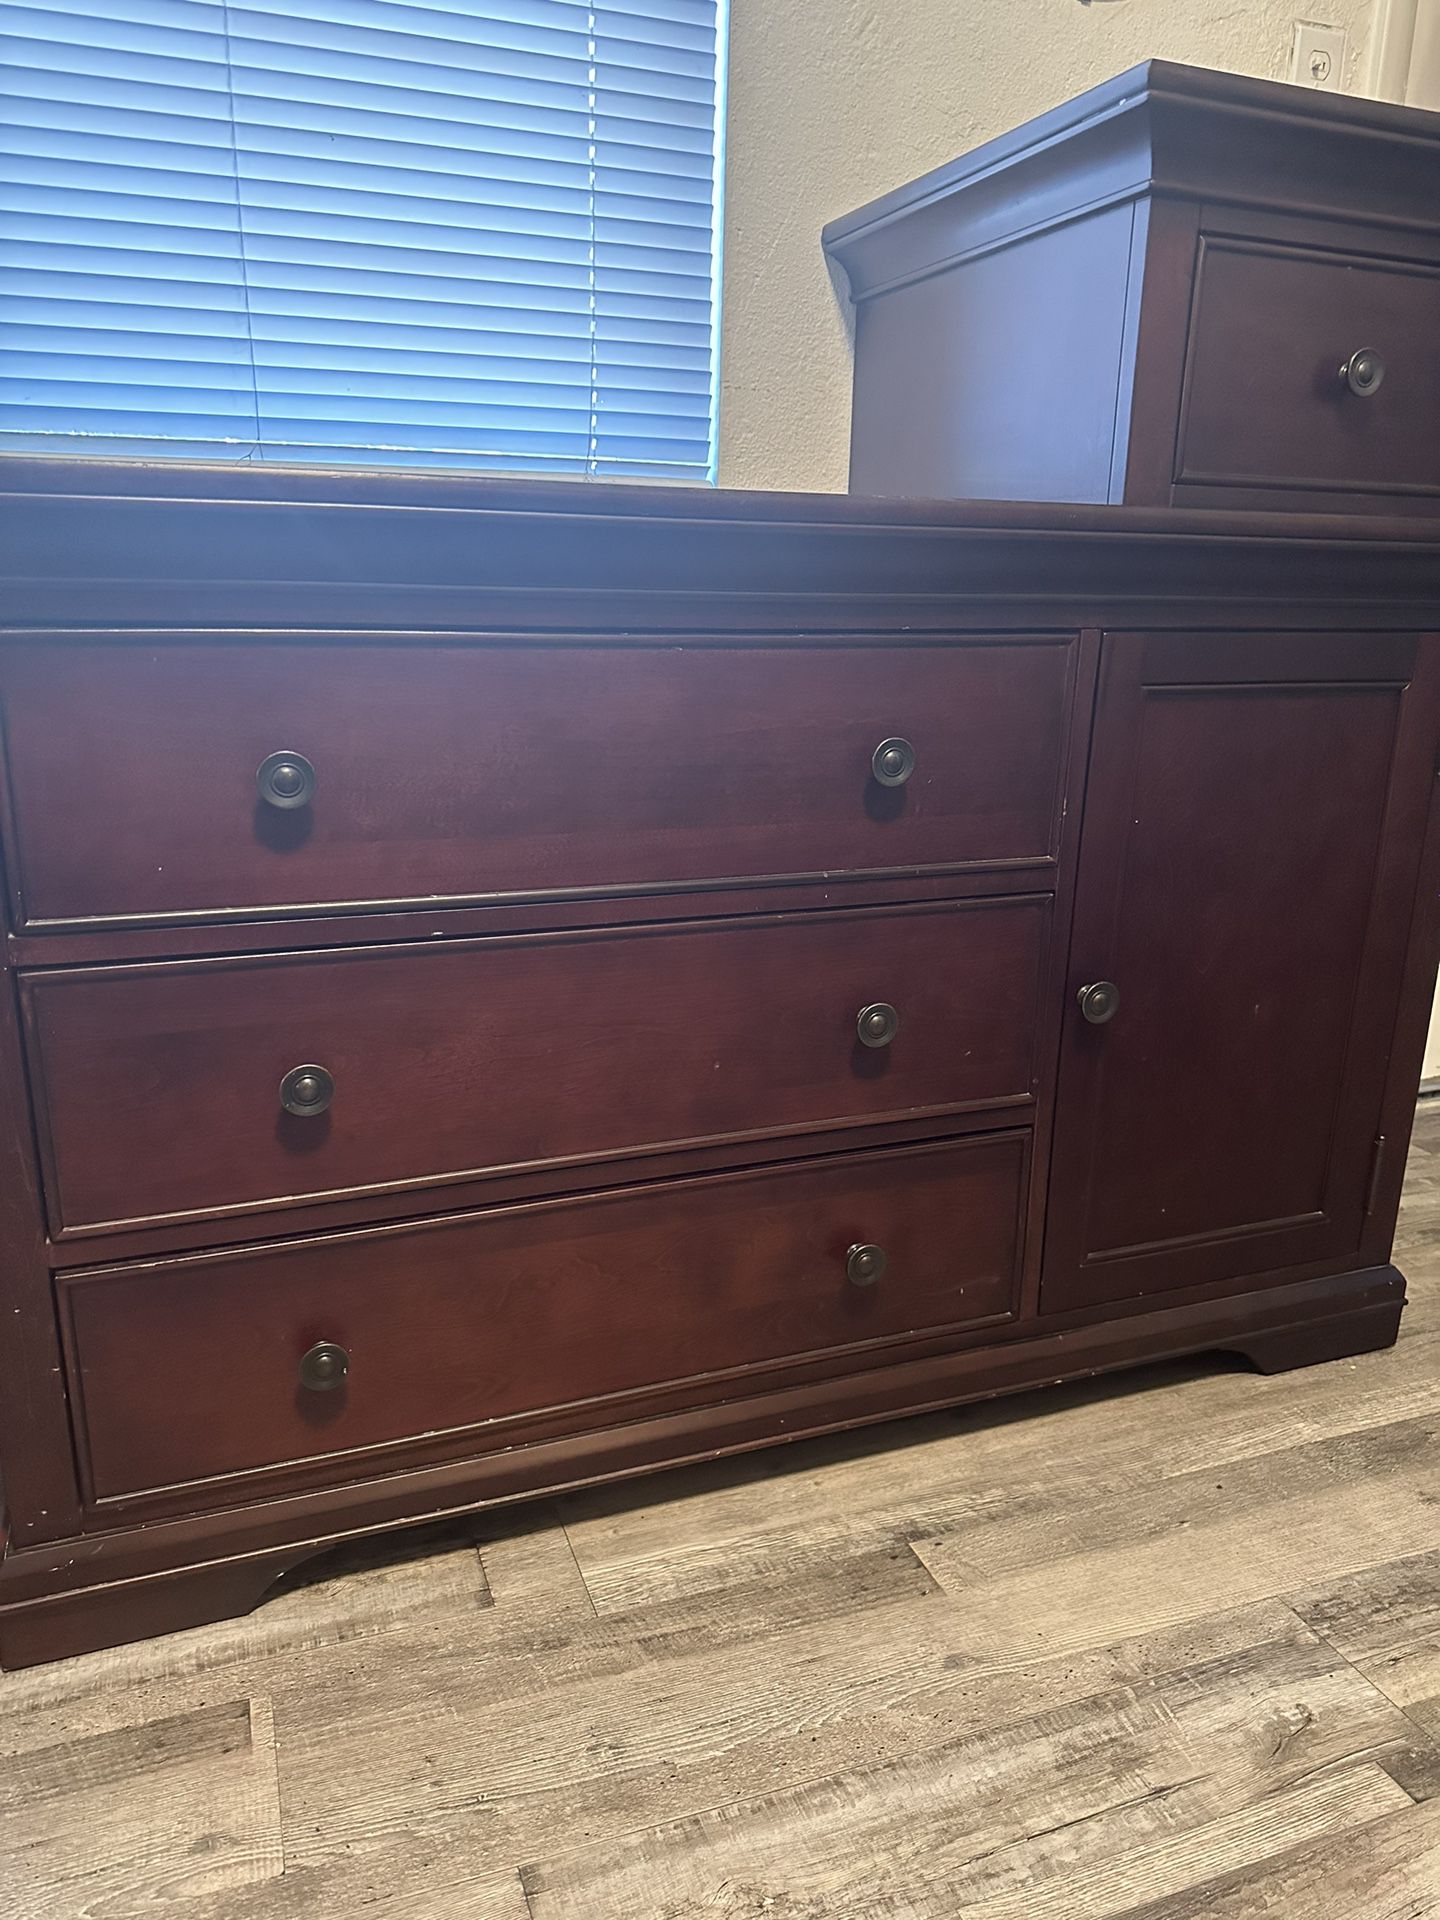 Free Delivery Changing table dresser Pottery Barn